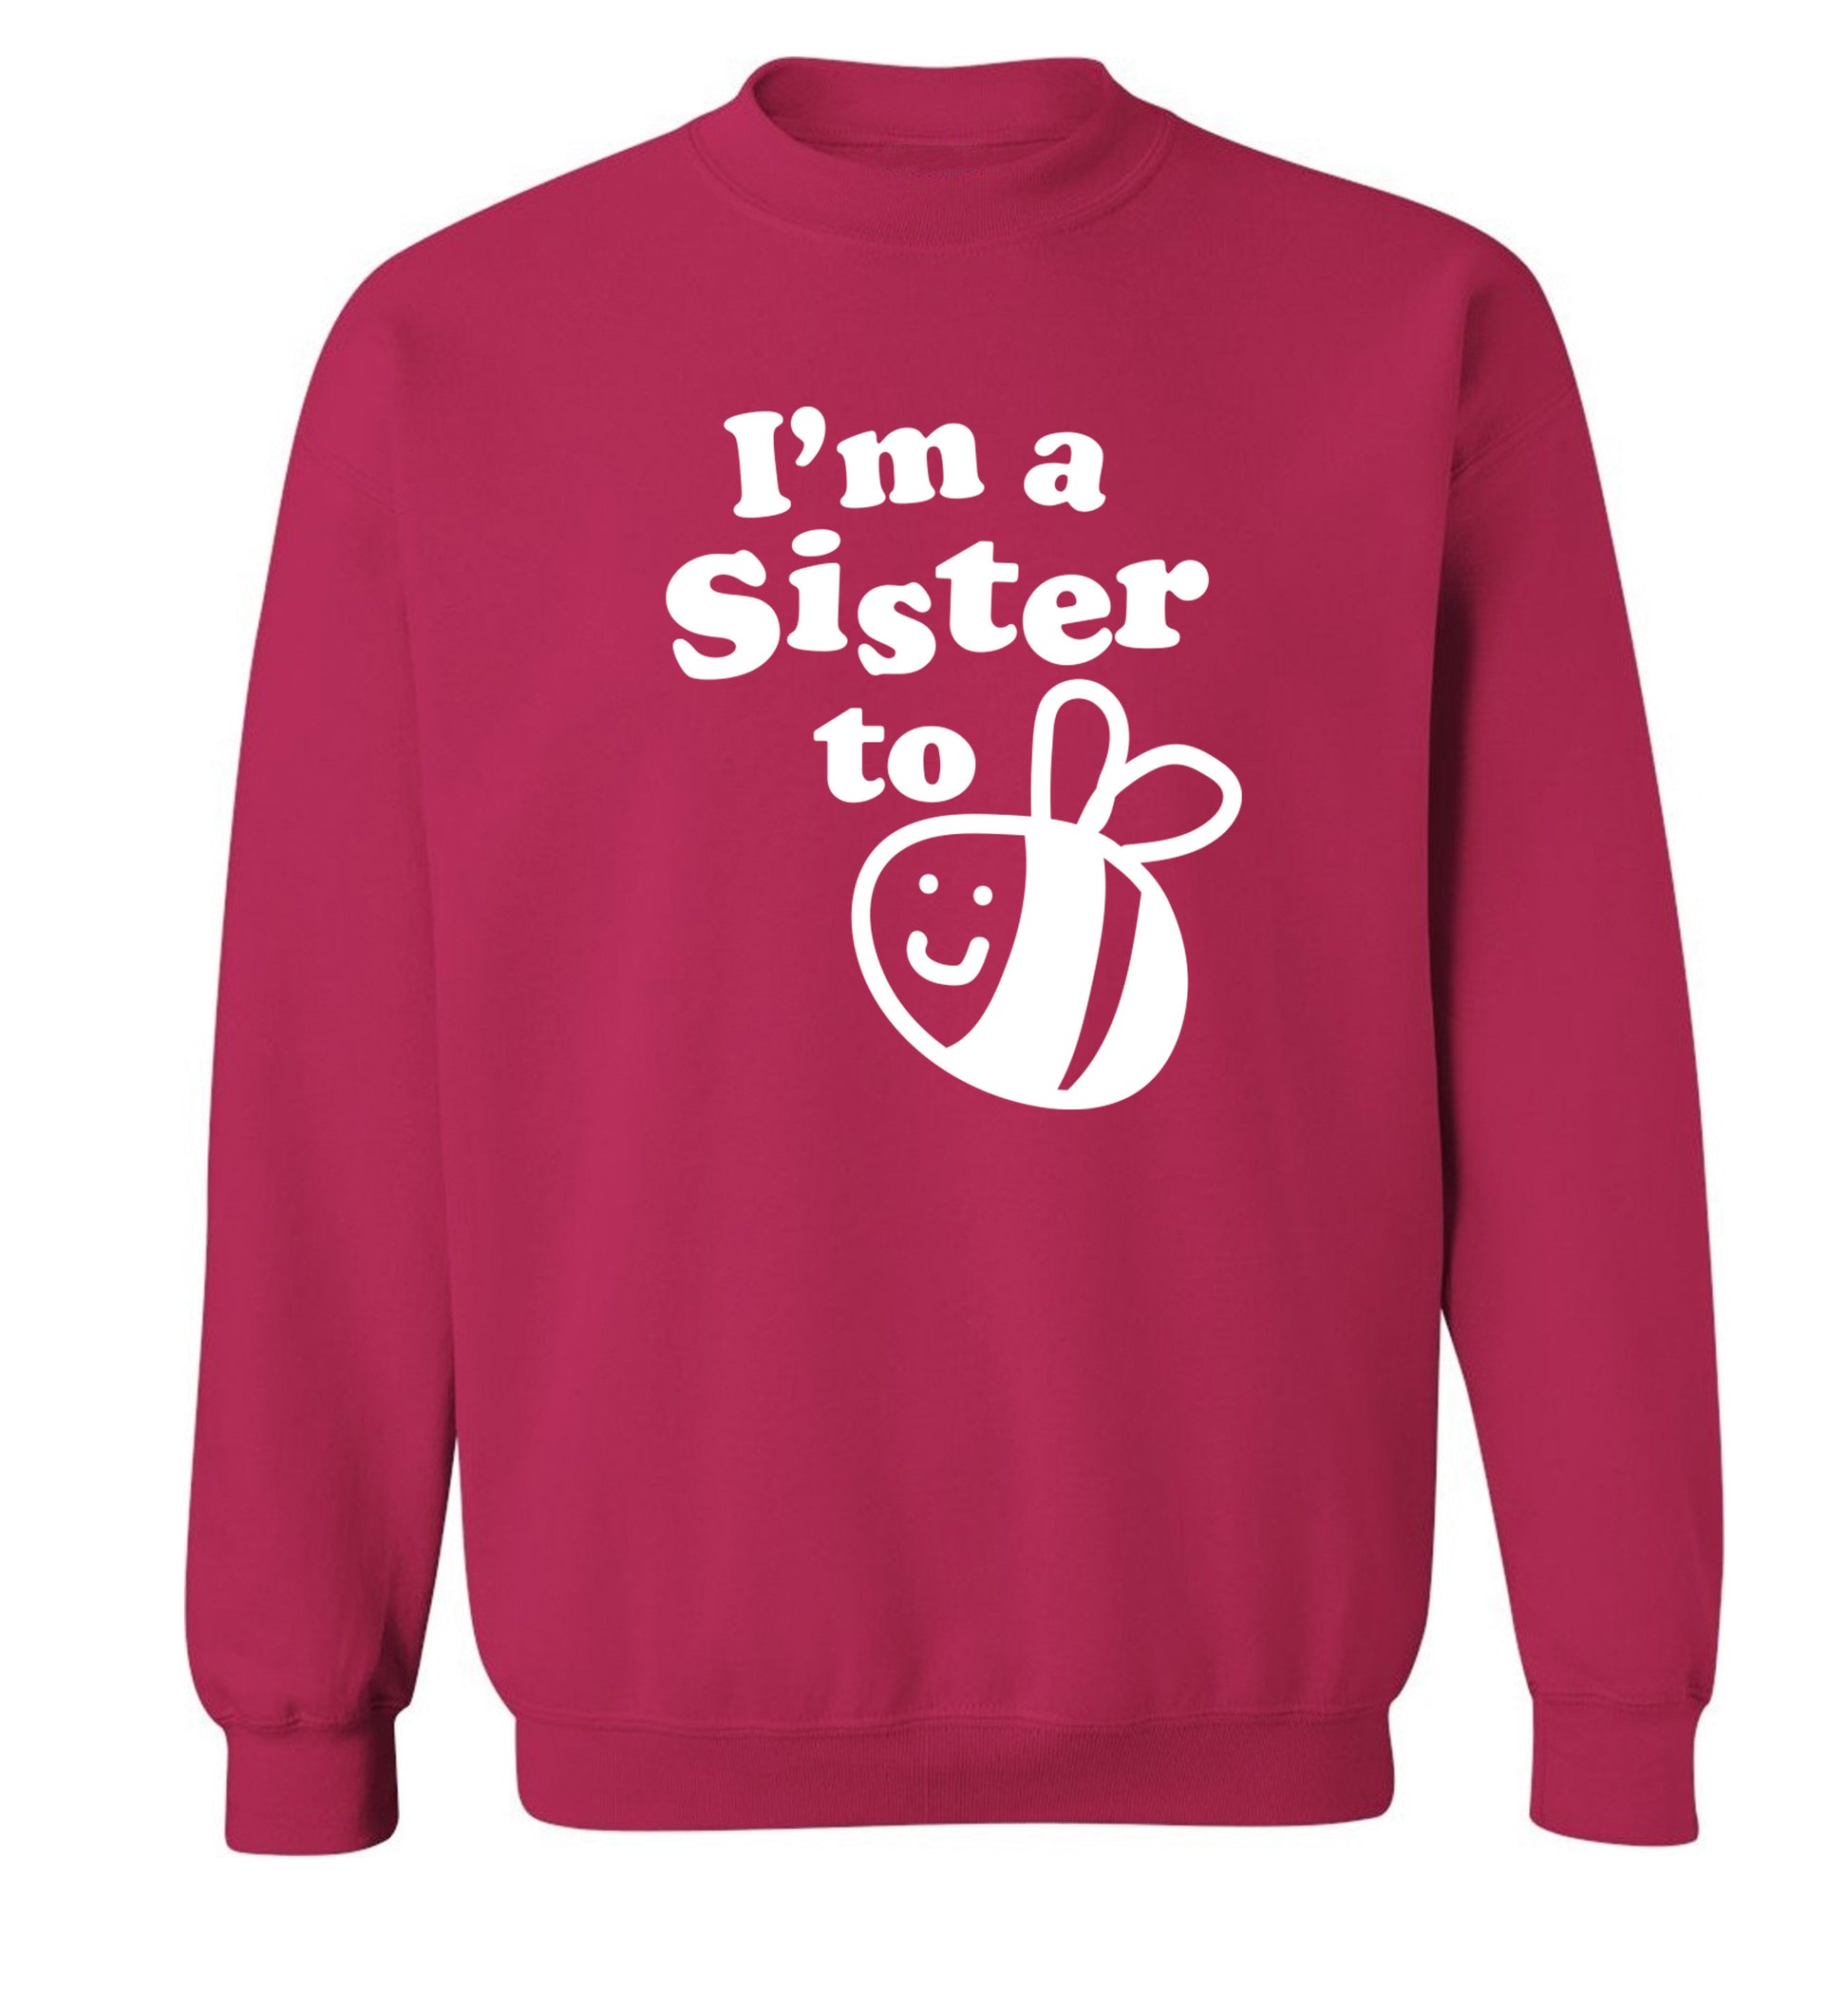 I'm a sister to be Adult's unisex pink Sweater 2XL